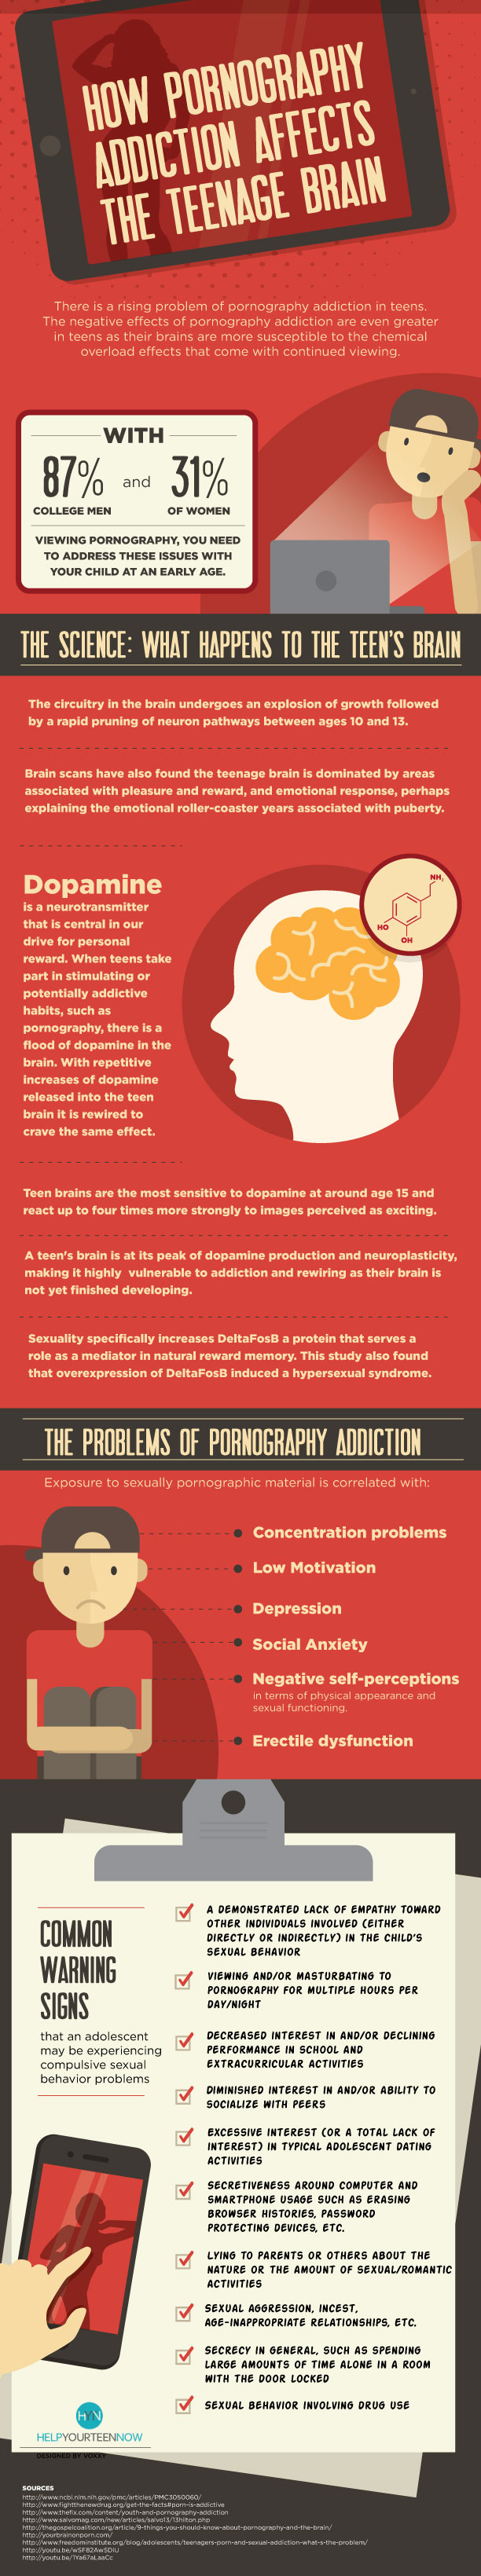 How Pornography Affects the Teenage Brain